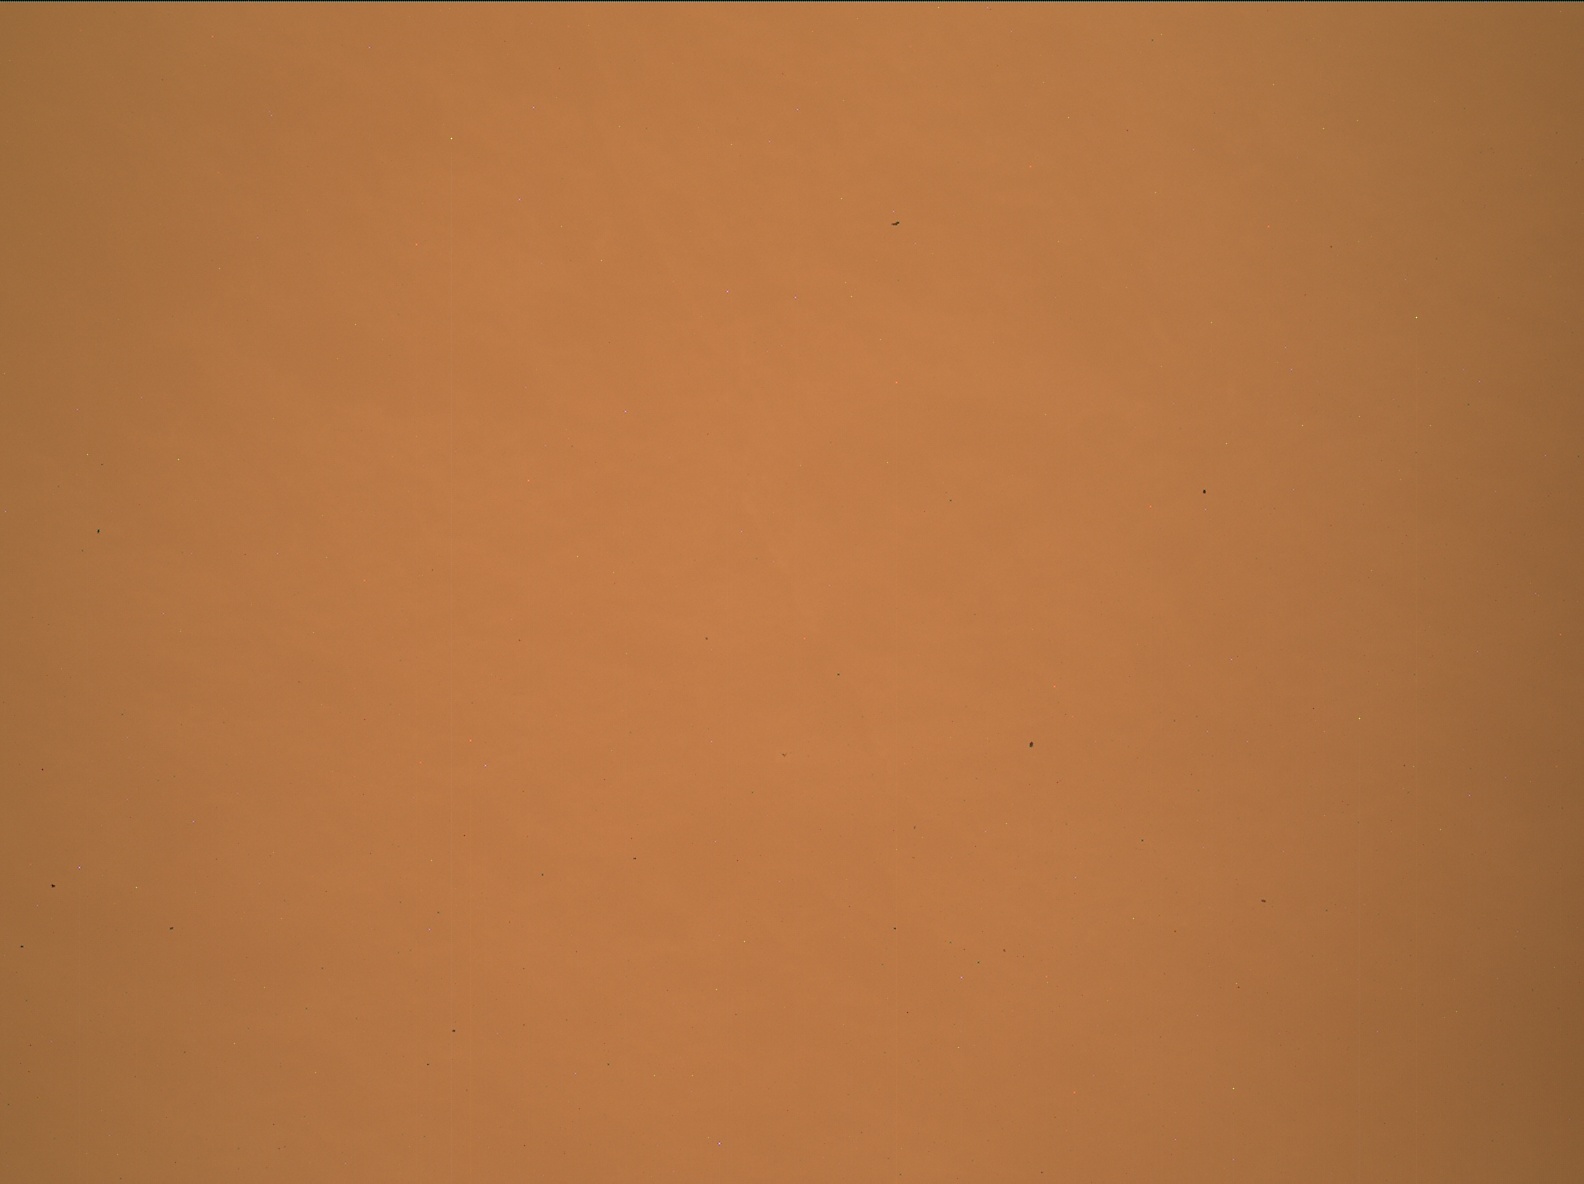 Nasa's Mars rover Curiosity acquired this image using its Mars Hand Lens Imager (MAHLI) on Sol 2295